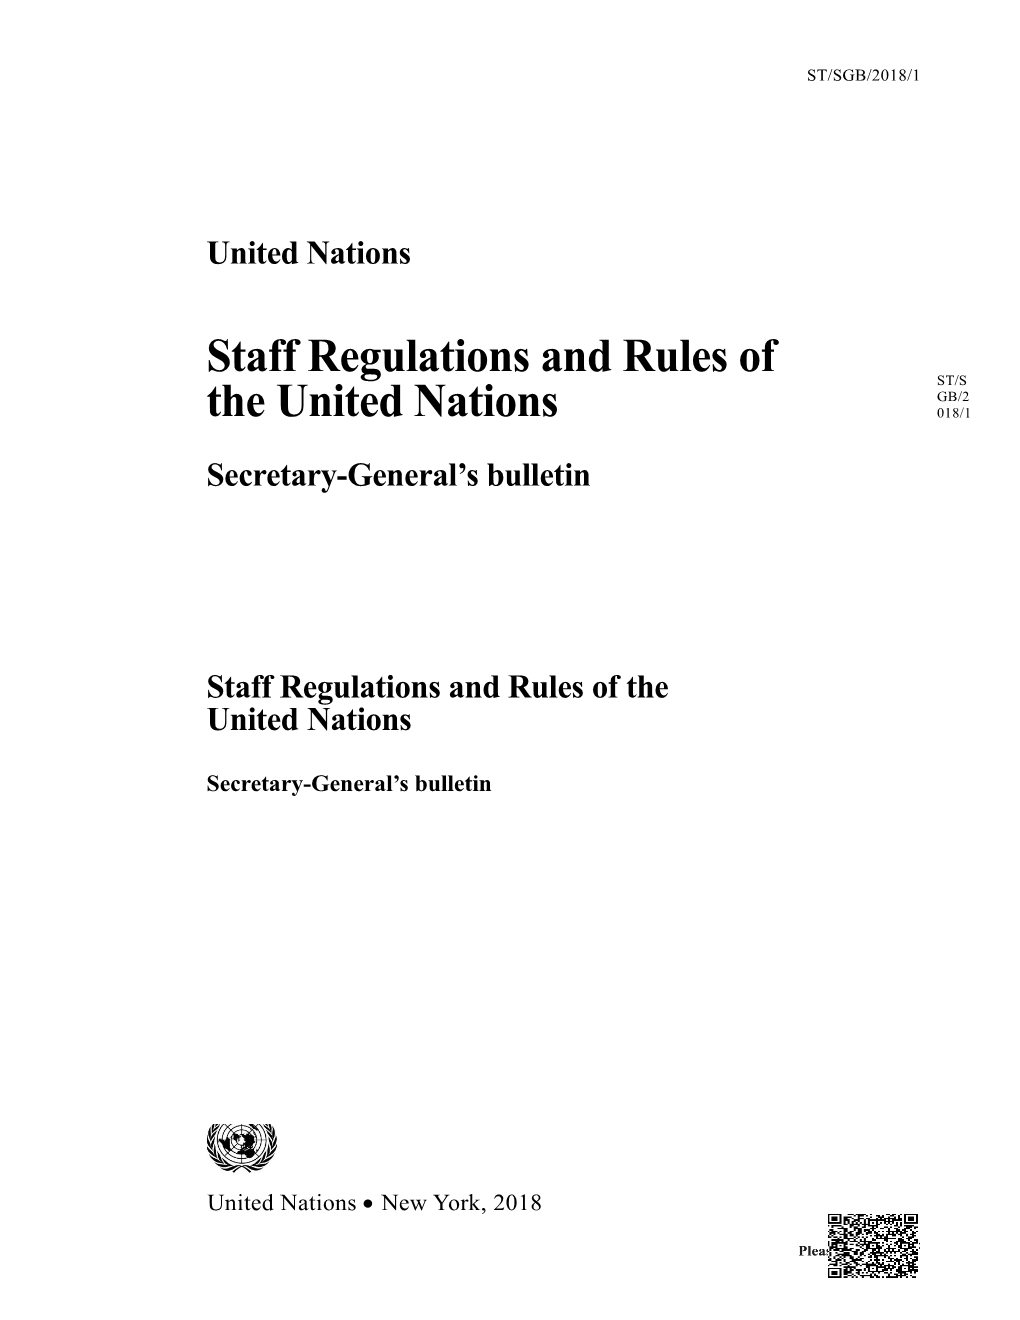 Staff Regulations and Rules of the United Nations